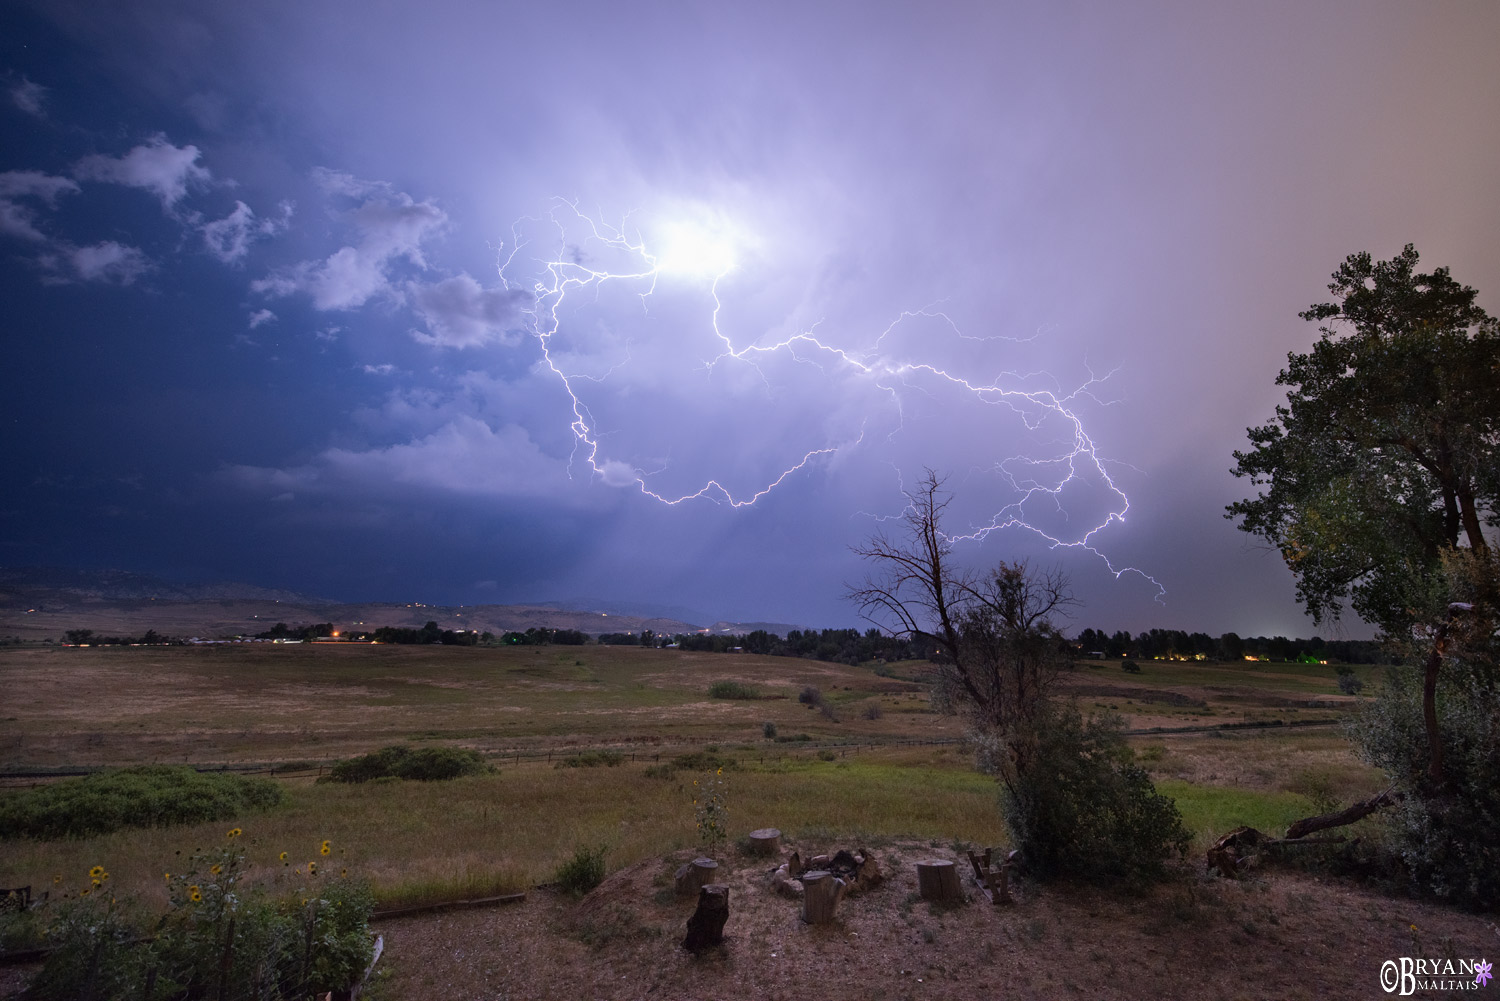 how to shoot lightning at night